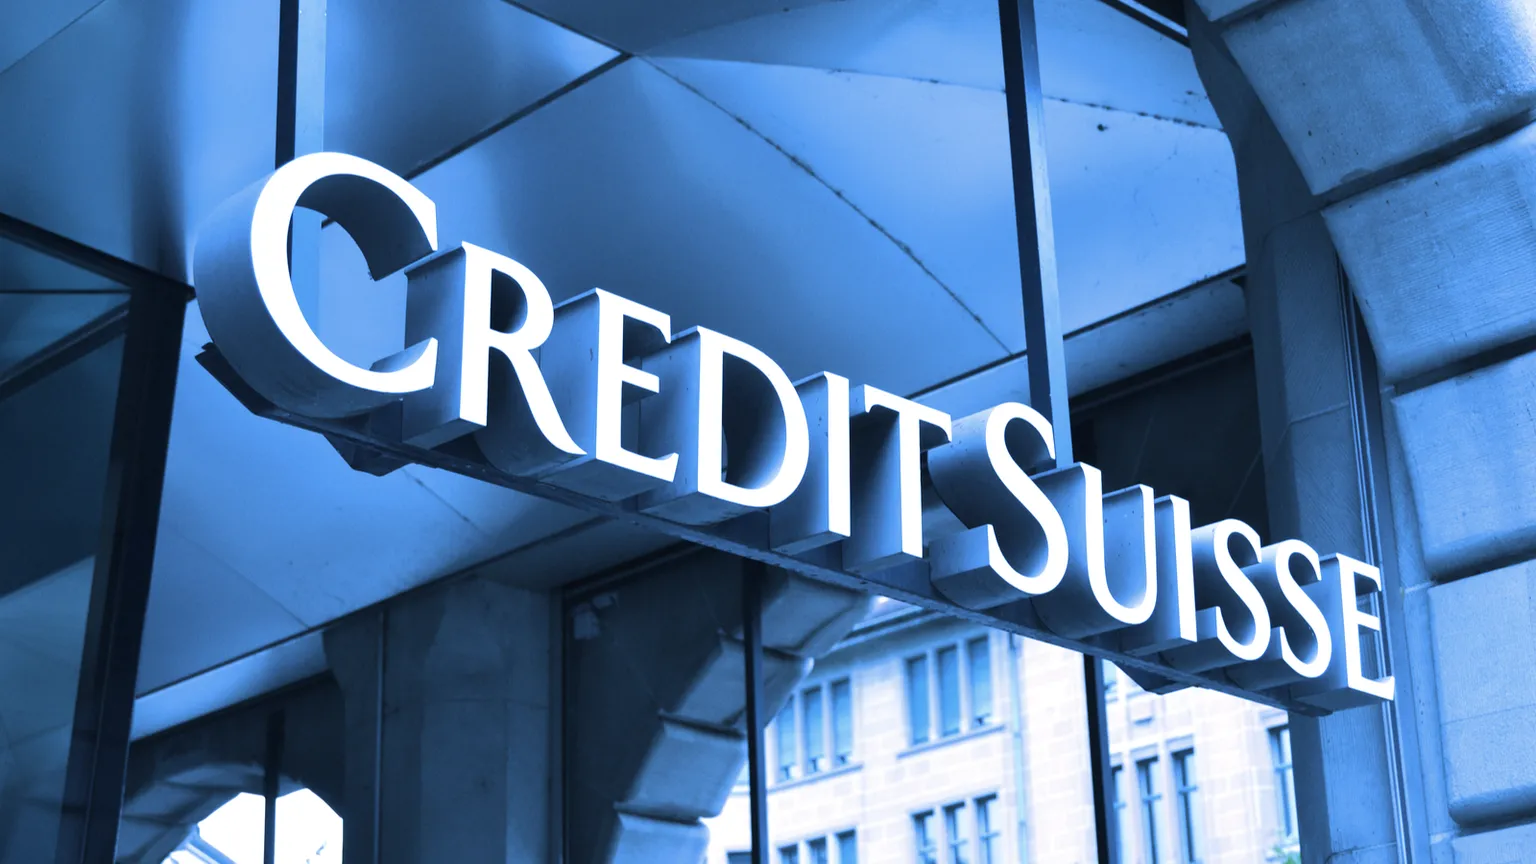 Credit Suisse is a Swiss bank. Image: Shutterstock